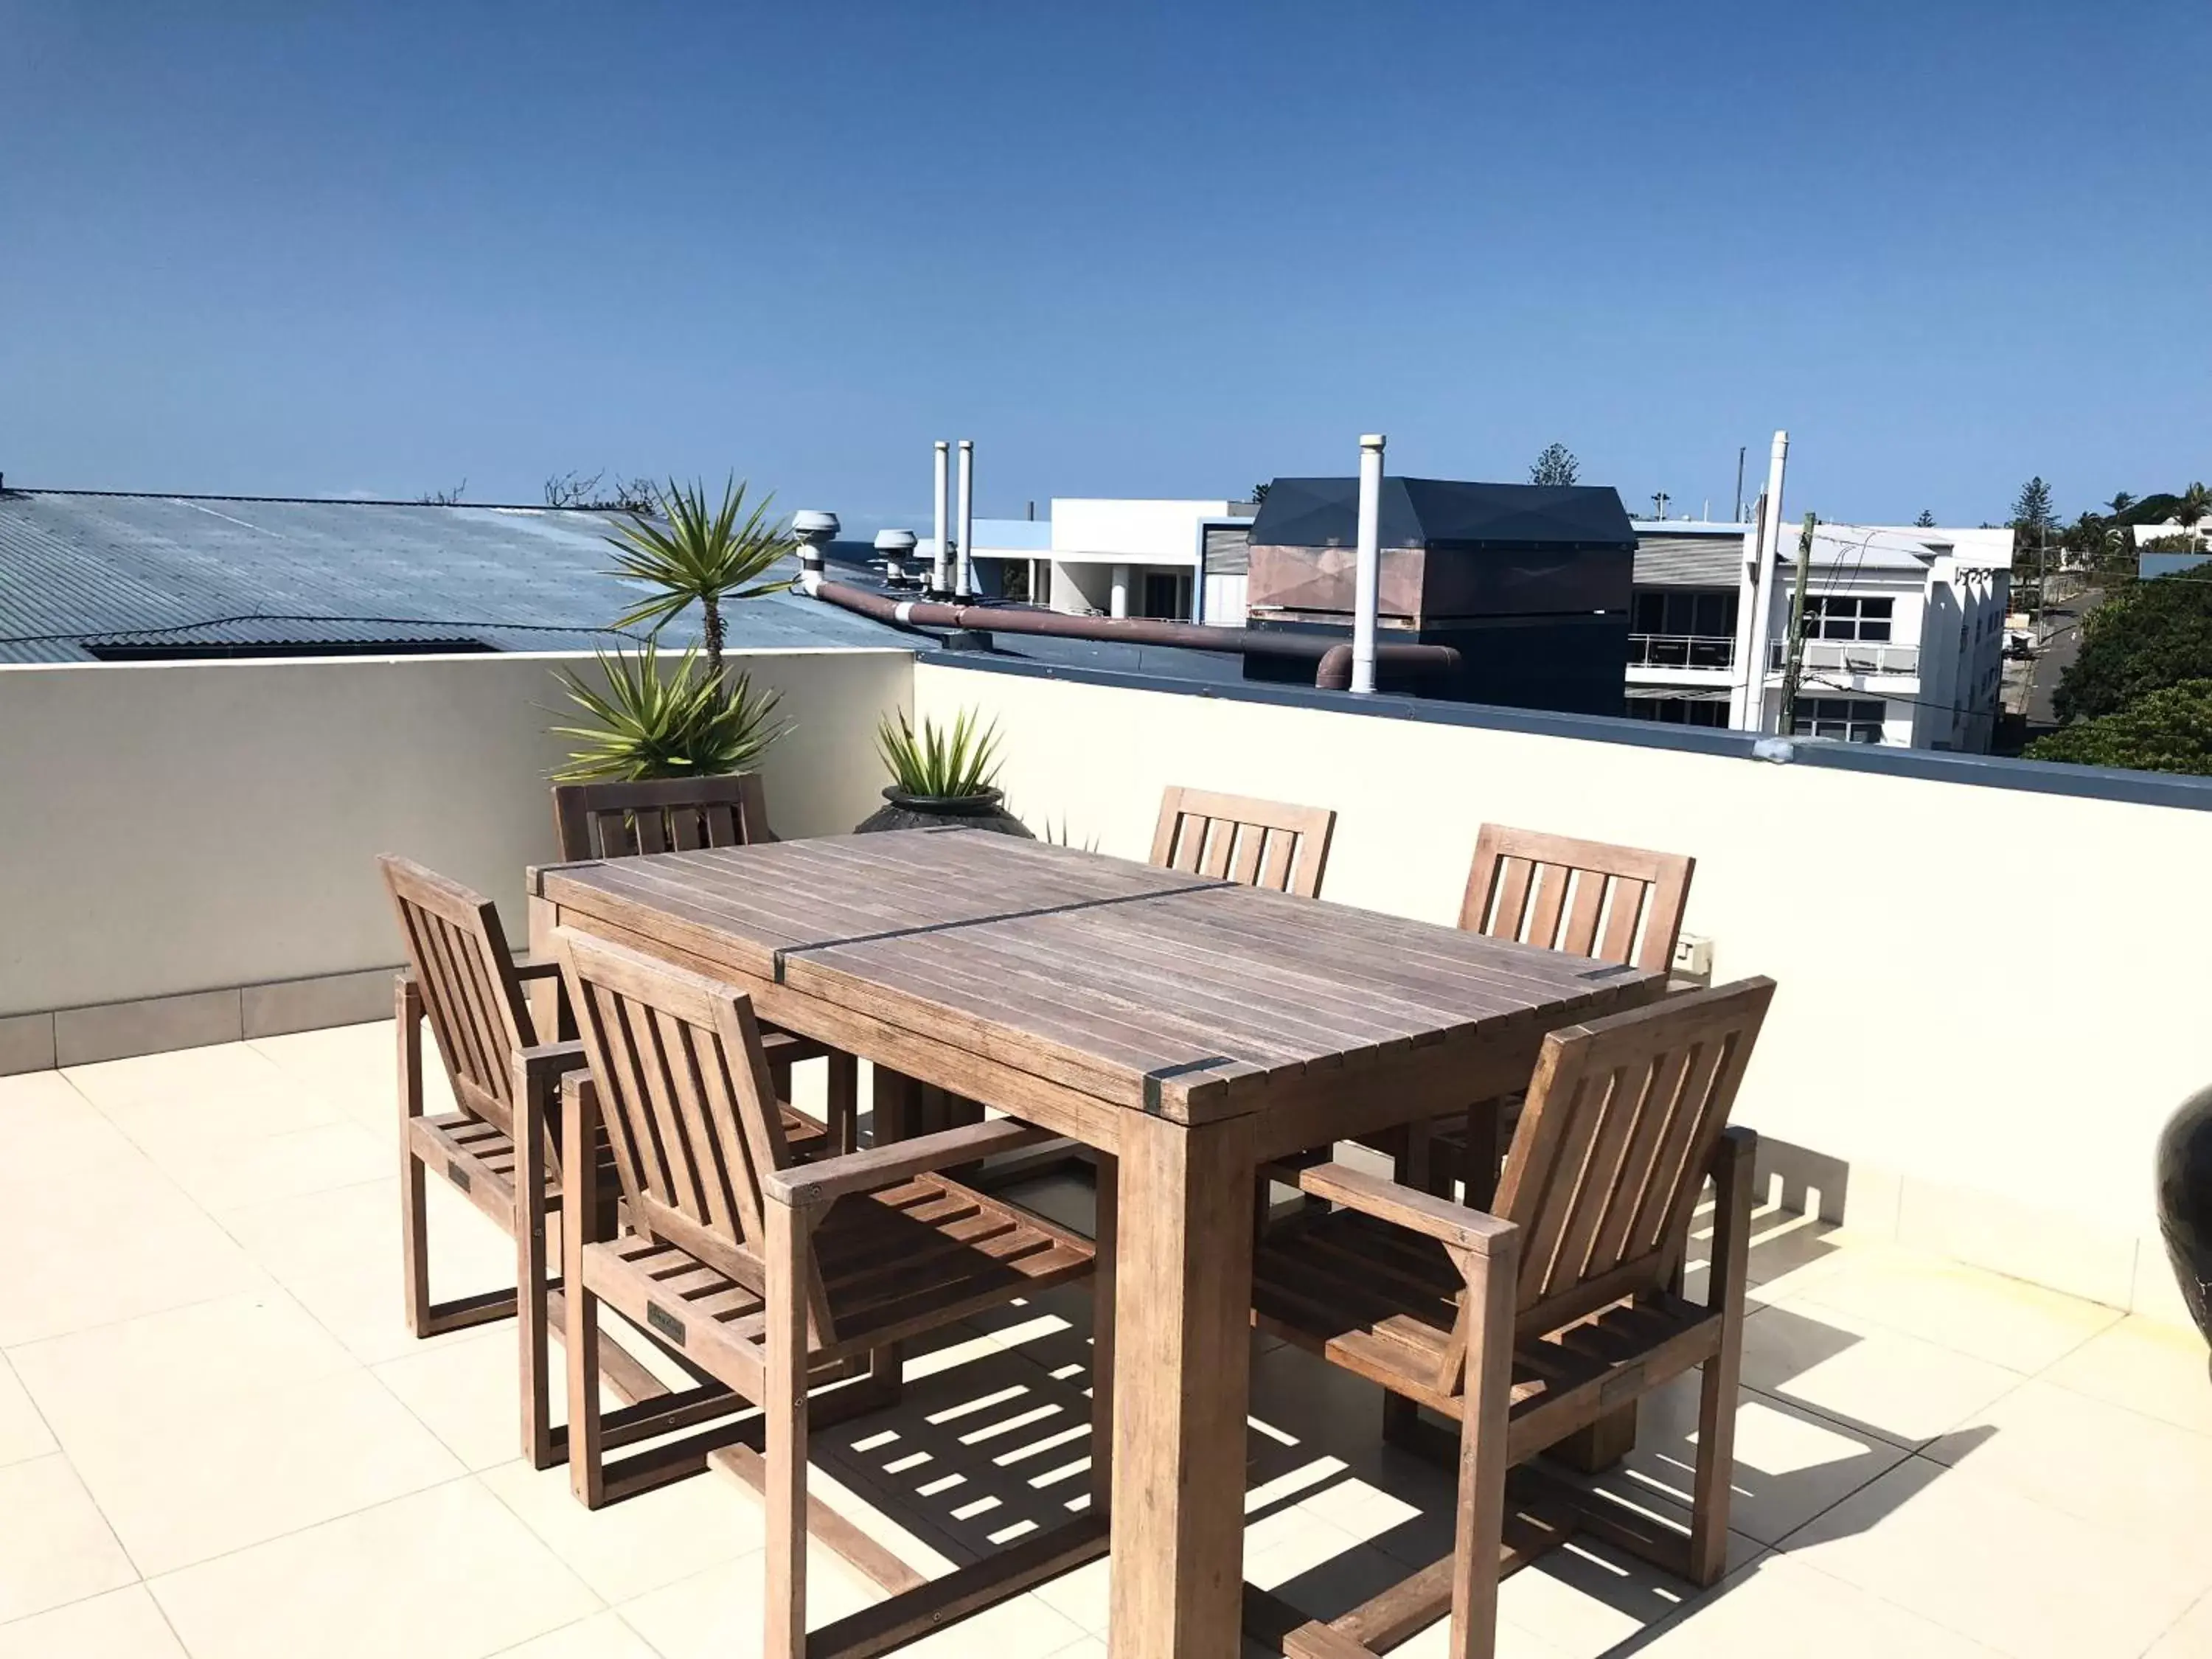 Three-Bedroom Apartment with Rooftop Deck and Countryside View in Paradiso Resort by Kingscliff Accommodation